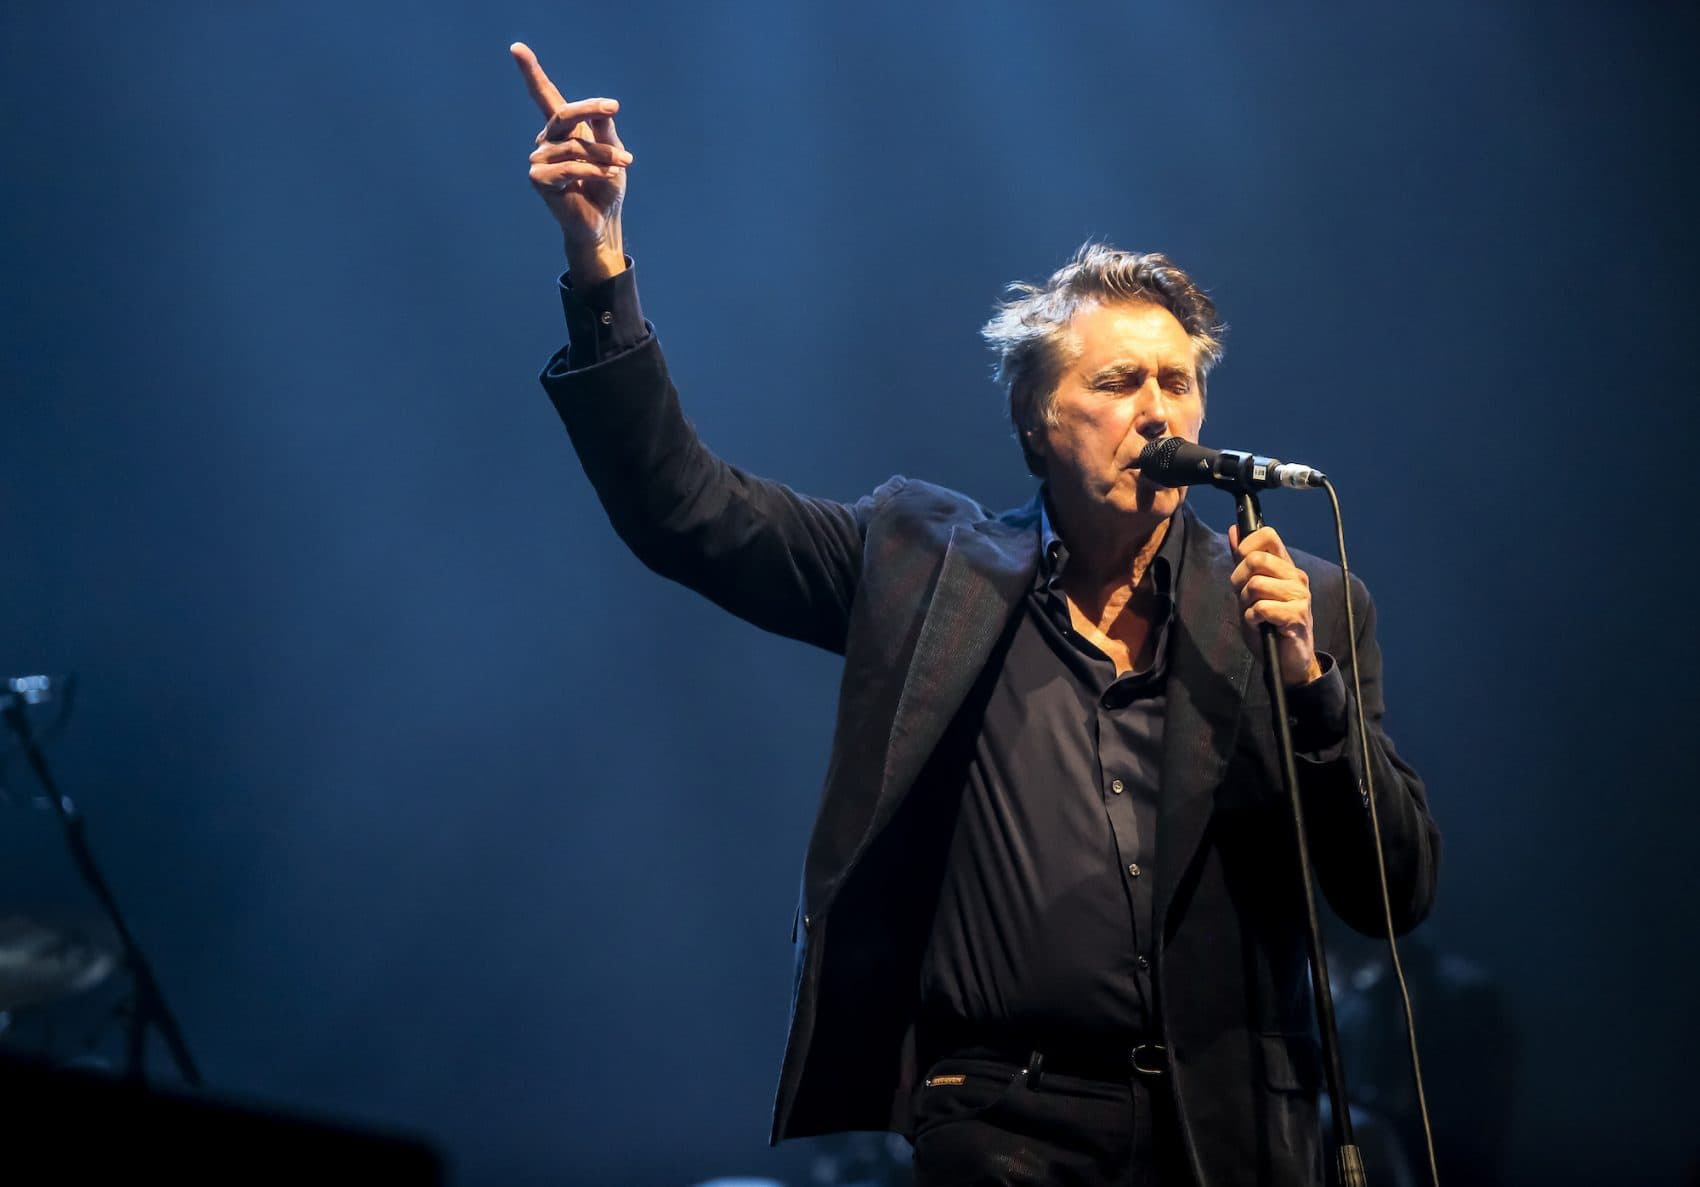 Bryan Ferry performing live at the New Theatre Oxford in England on May 9, 2015. (Courtesy Bryan Ferry)